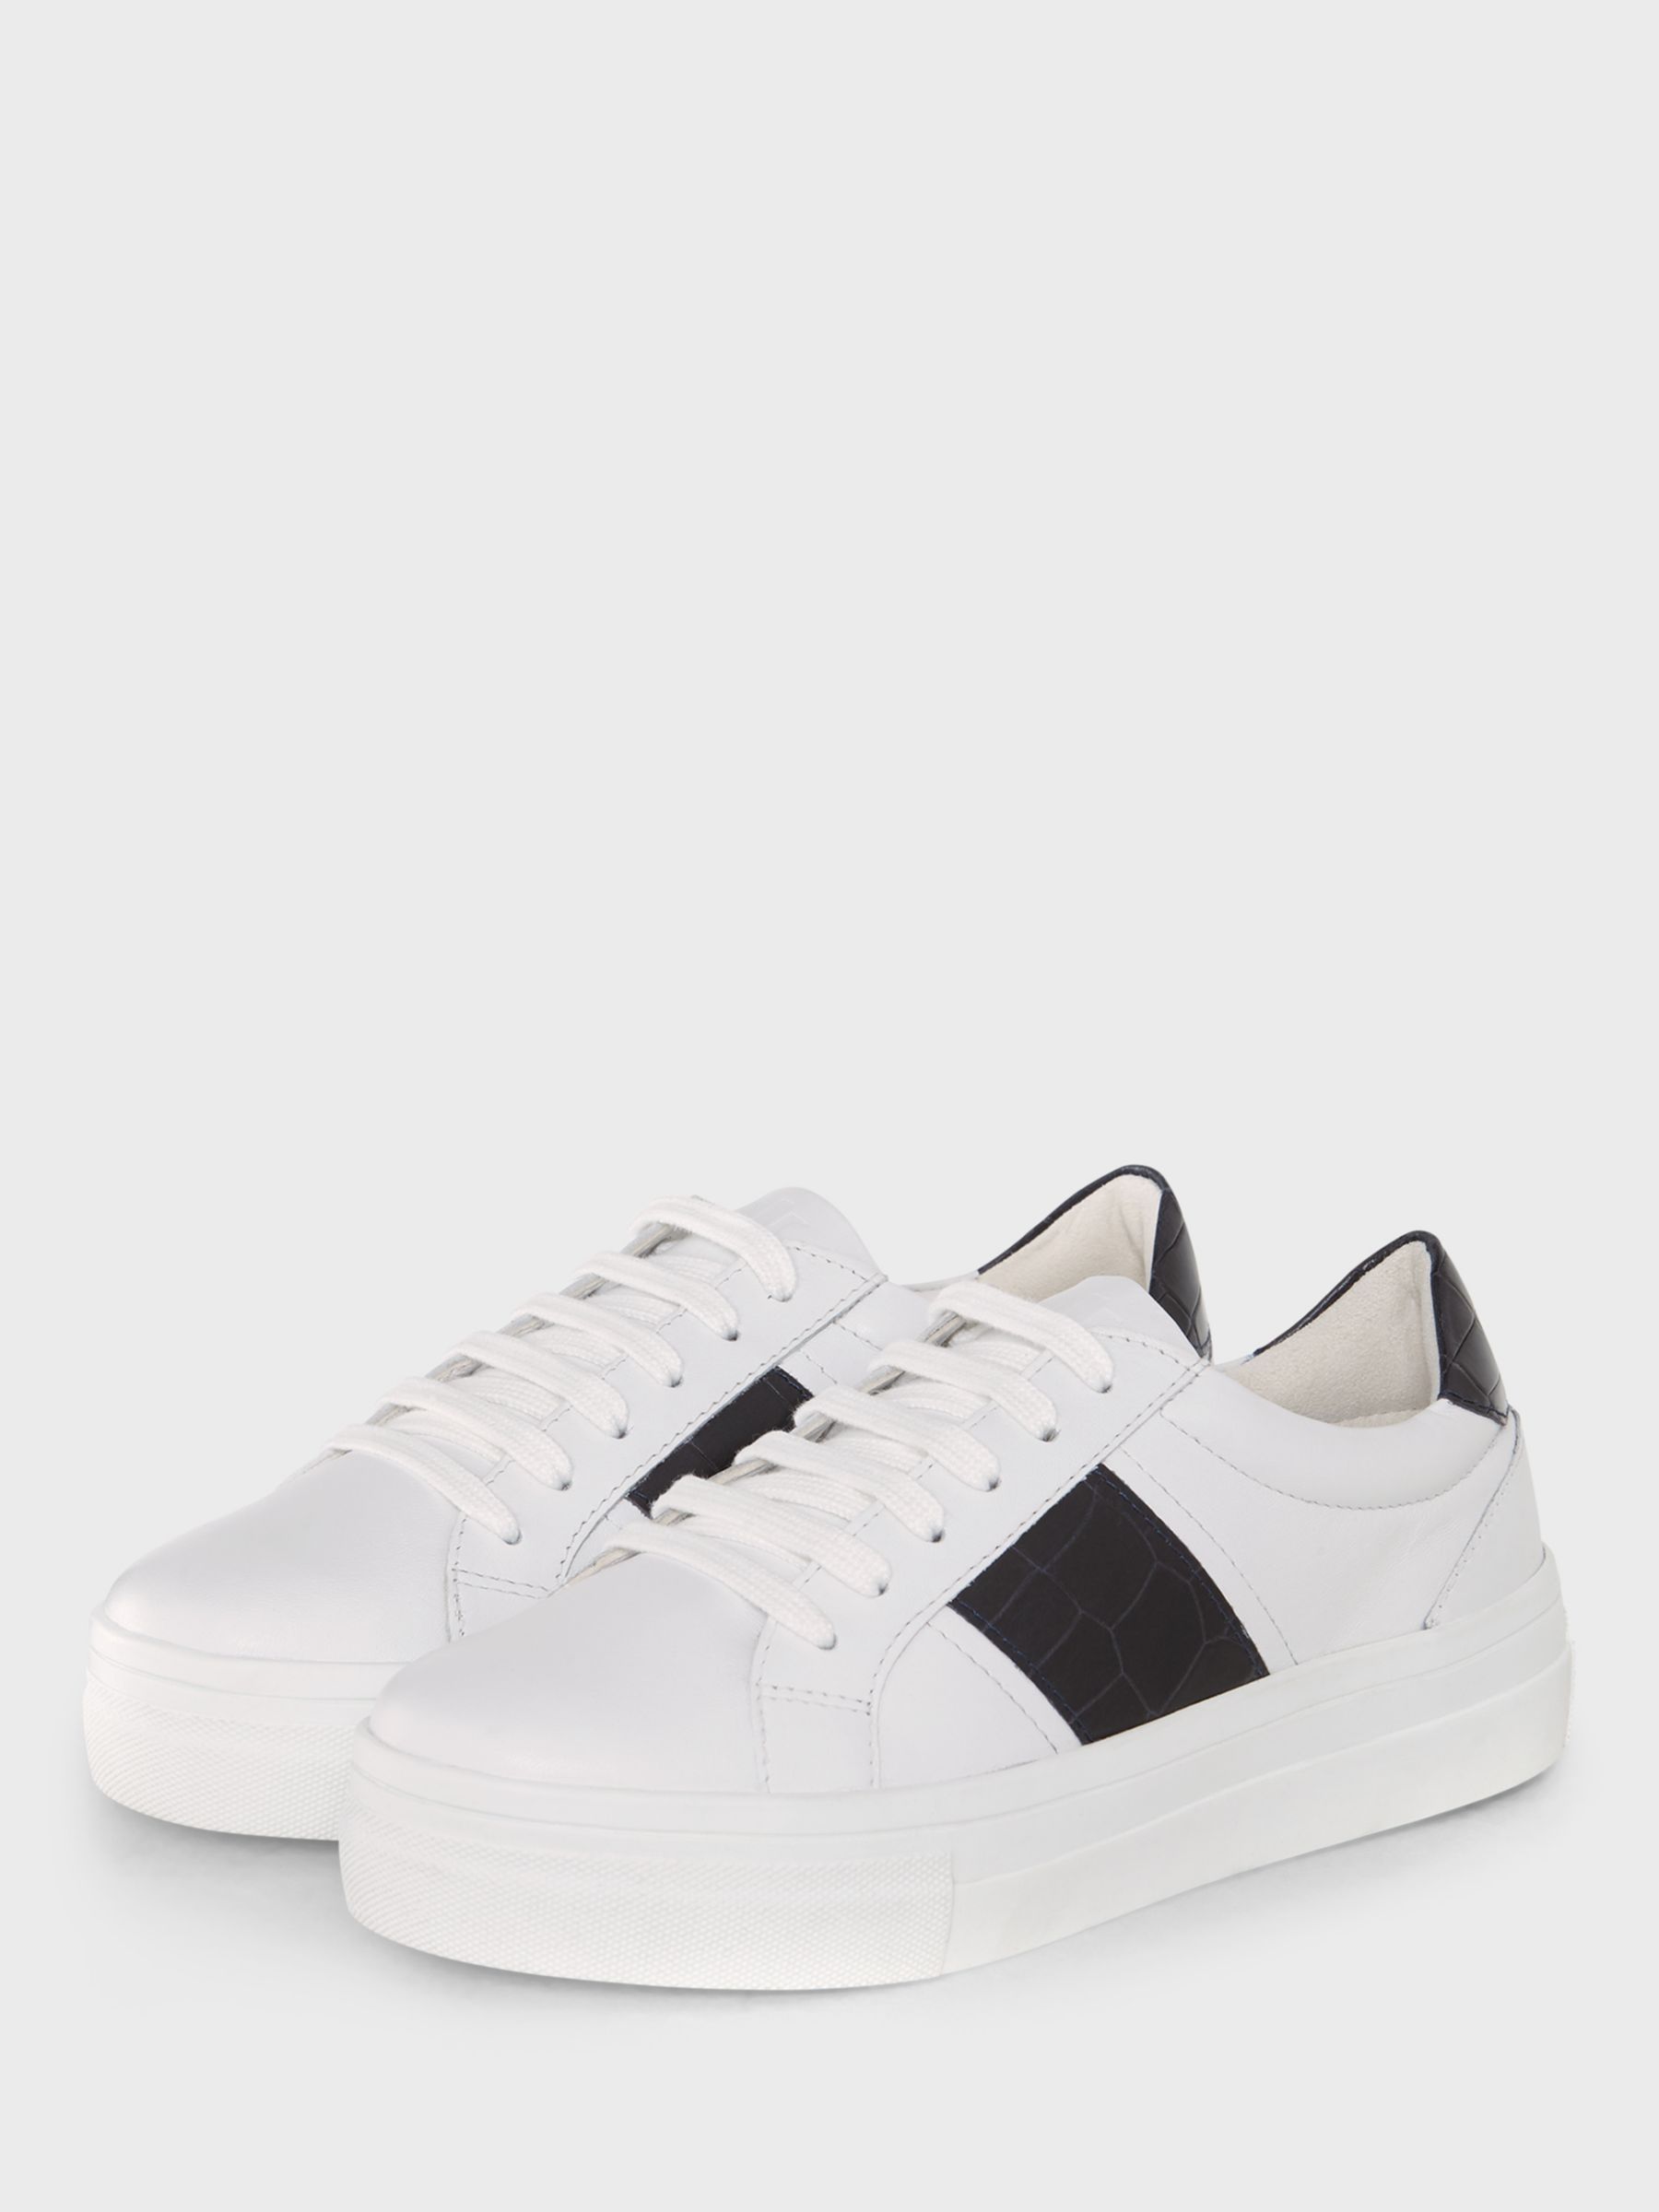 Hobbs Victoria Low Top Leather Trainers, White/Black at John Lewis ...